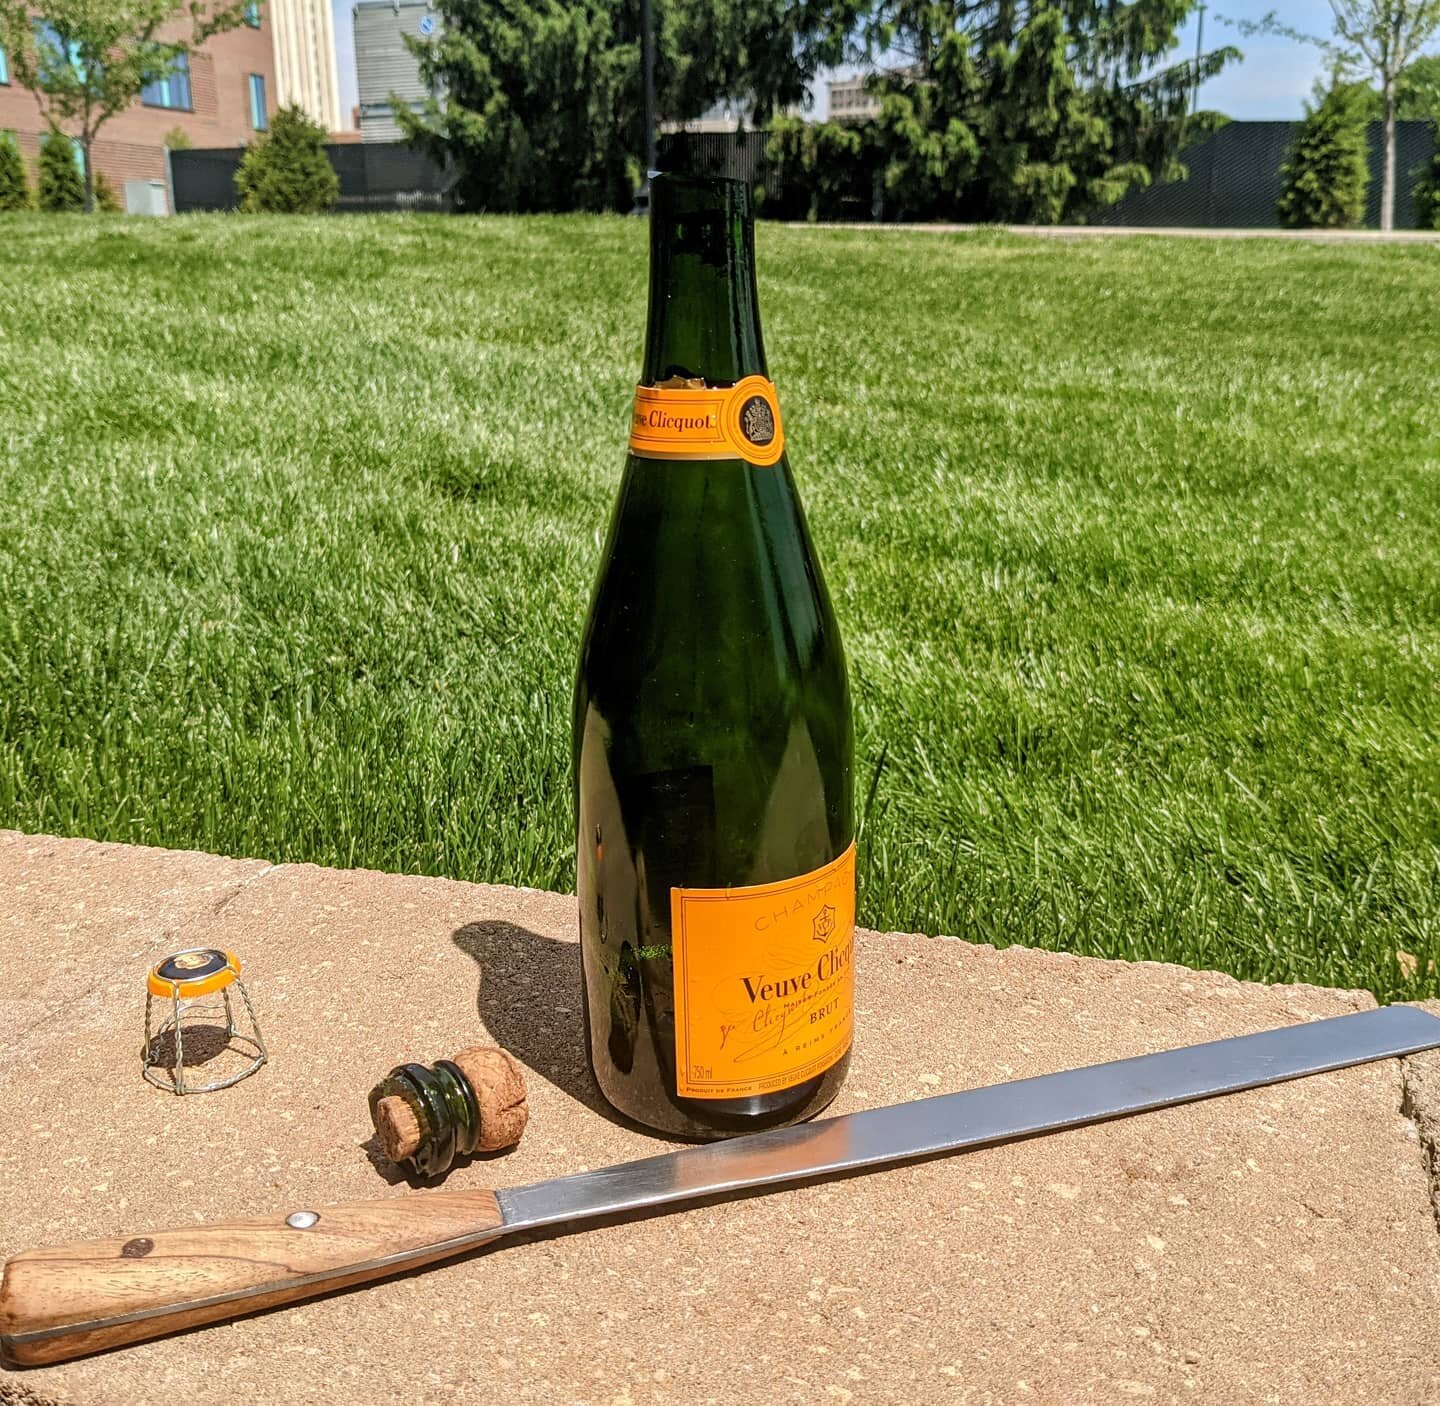 And another student graduates! My custom made champagne saber chemistry spatula worked! #champagne #graduation #saberchampagne